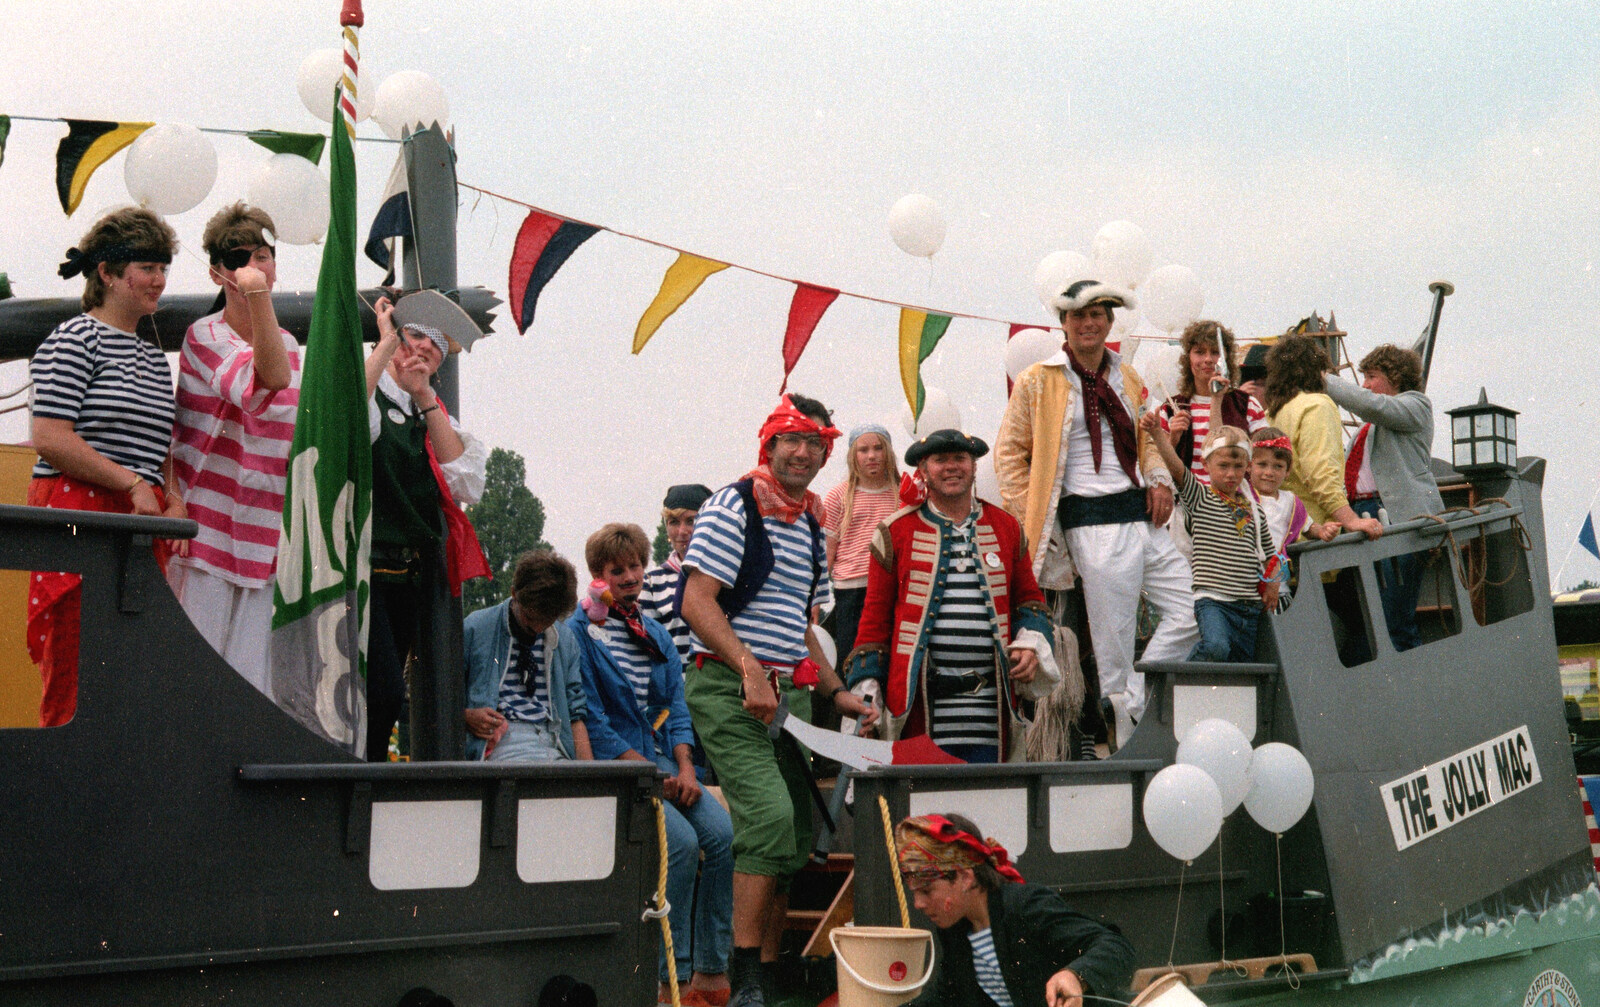 The McStone Jolly Mac from The Lymington Carnival, Hampshire - 17th June 1985